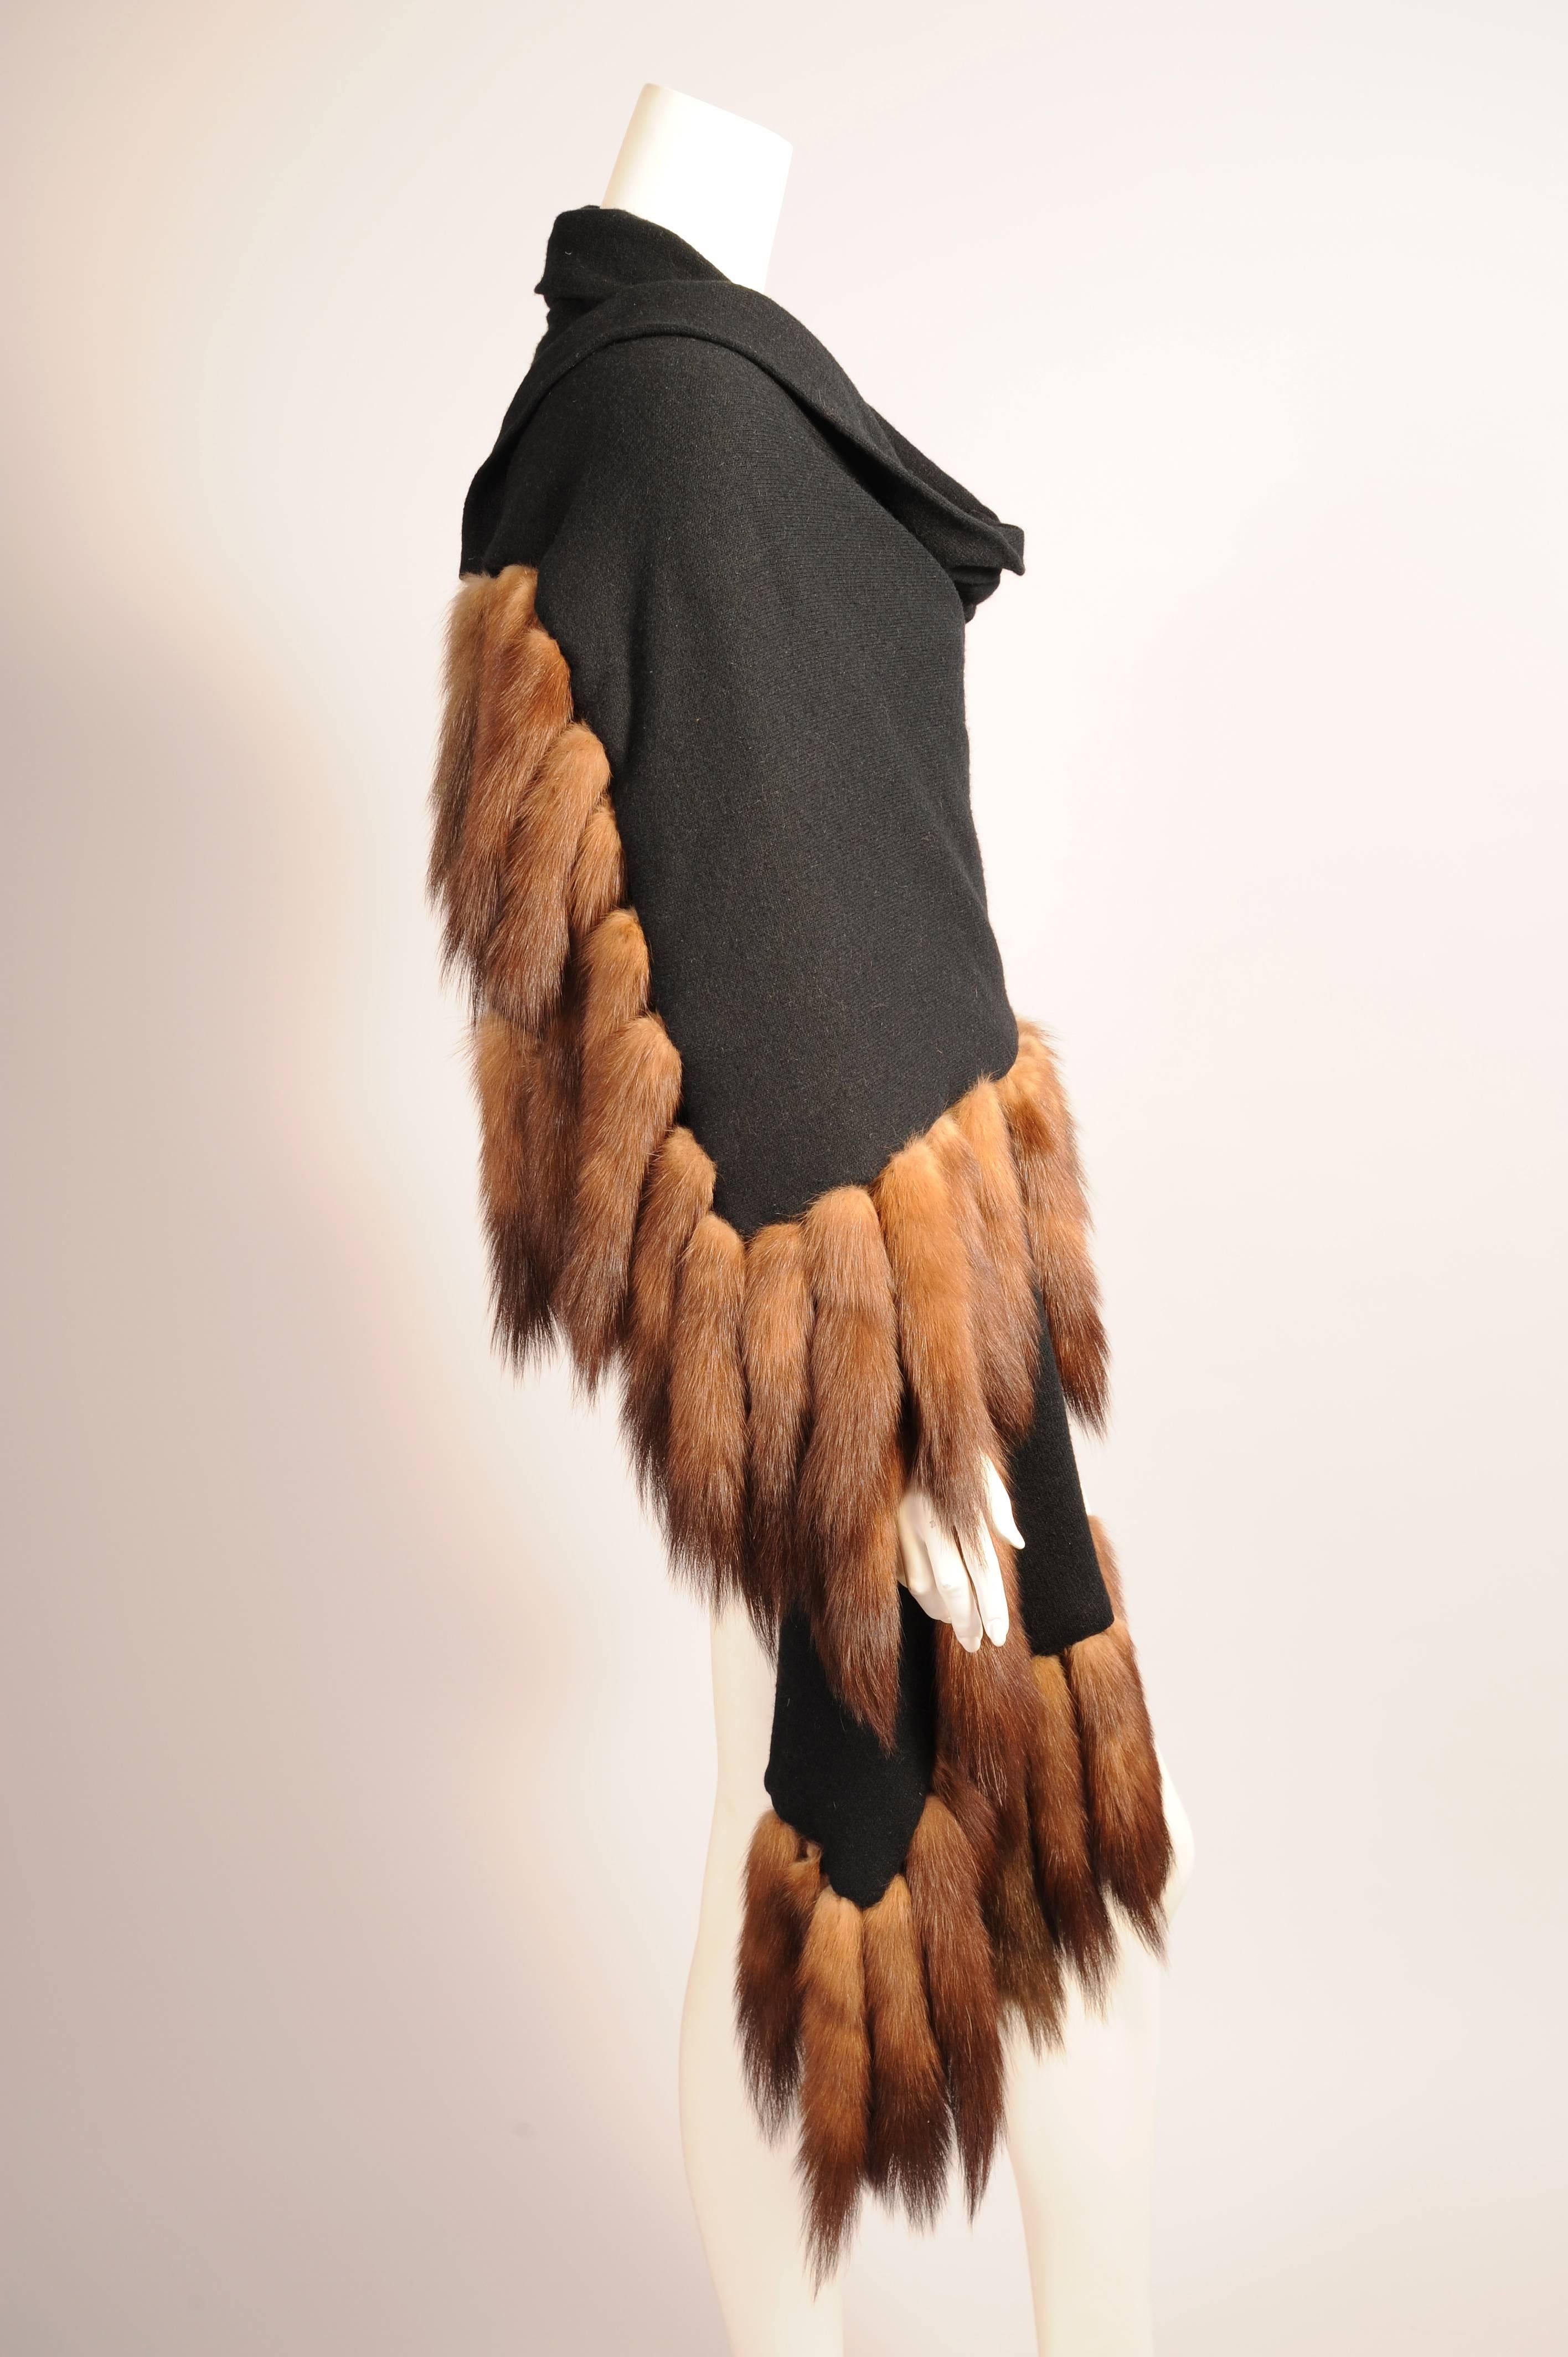 A luscious black cashmere shawl is trimmed with sable tails on three sides. The shawl is double thickness for added warmth. There is no label but it is  probably designed by Adrienne Landau. It is in excellent condition.
Measurements;
Length